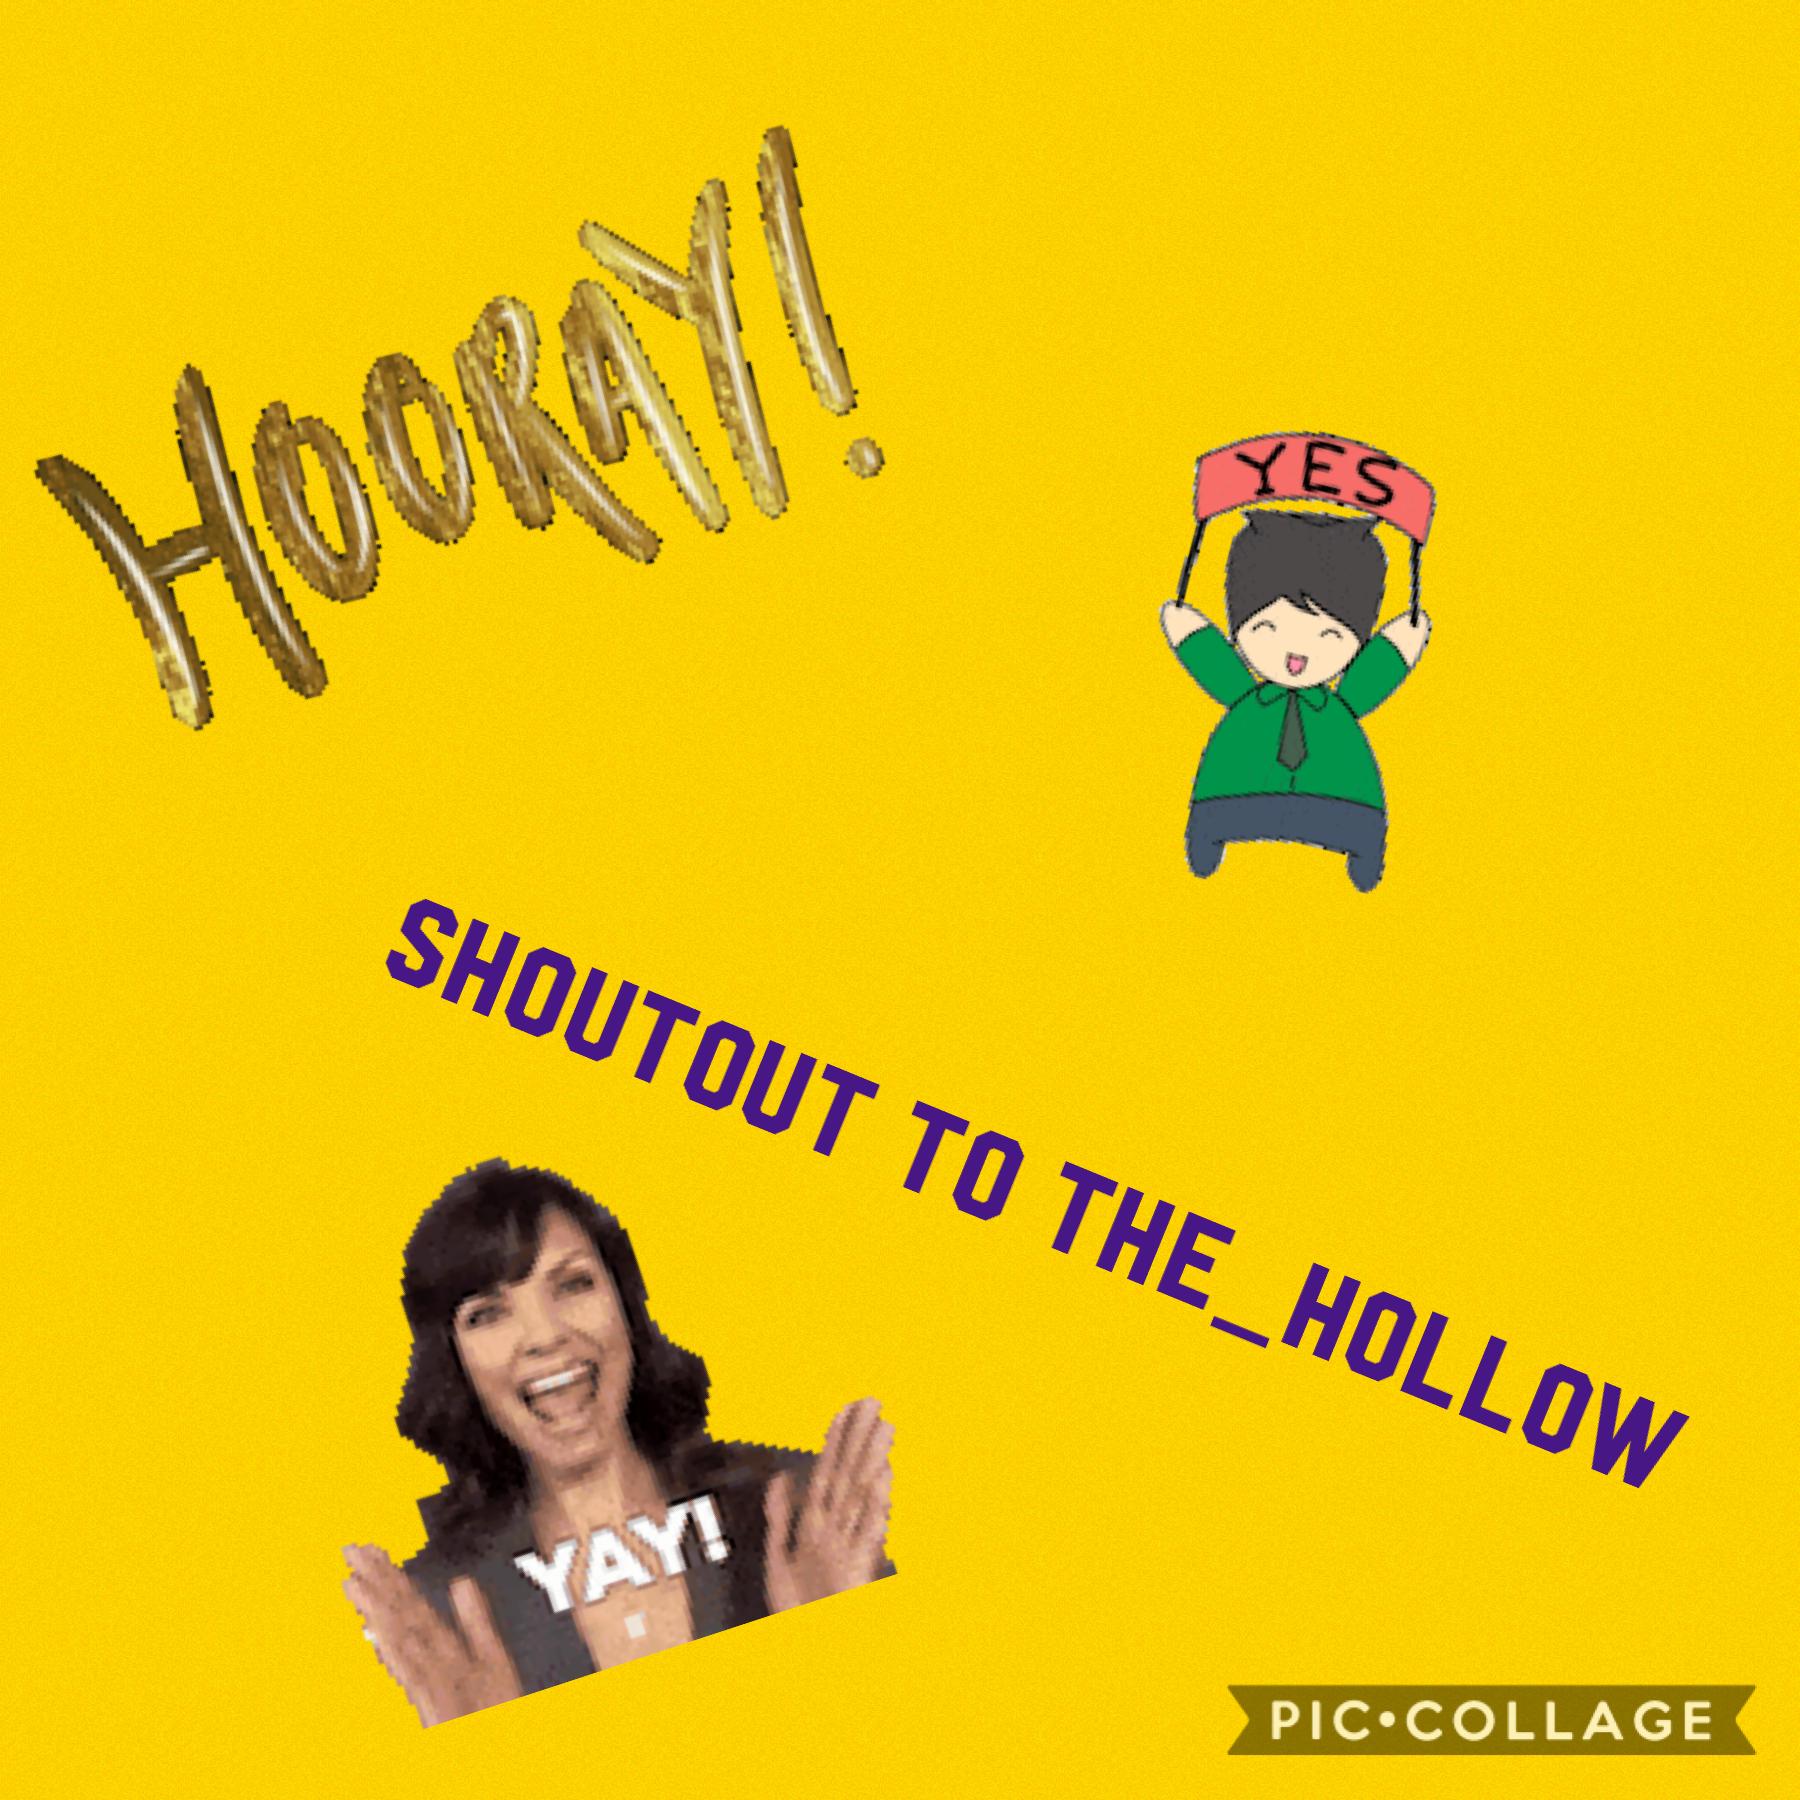 ⭐️tap⭐️
Thank you The_Hollow for being my seventh follower!!!